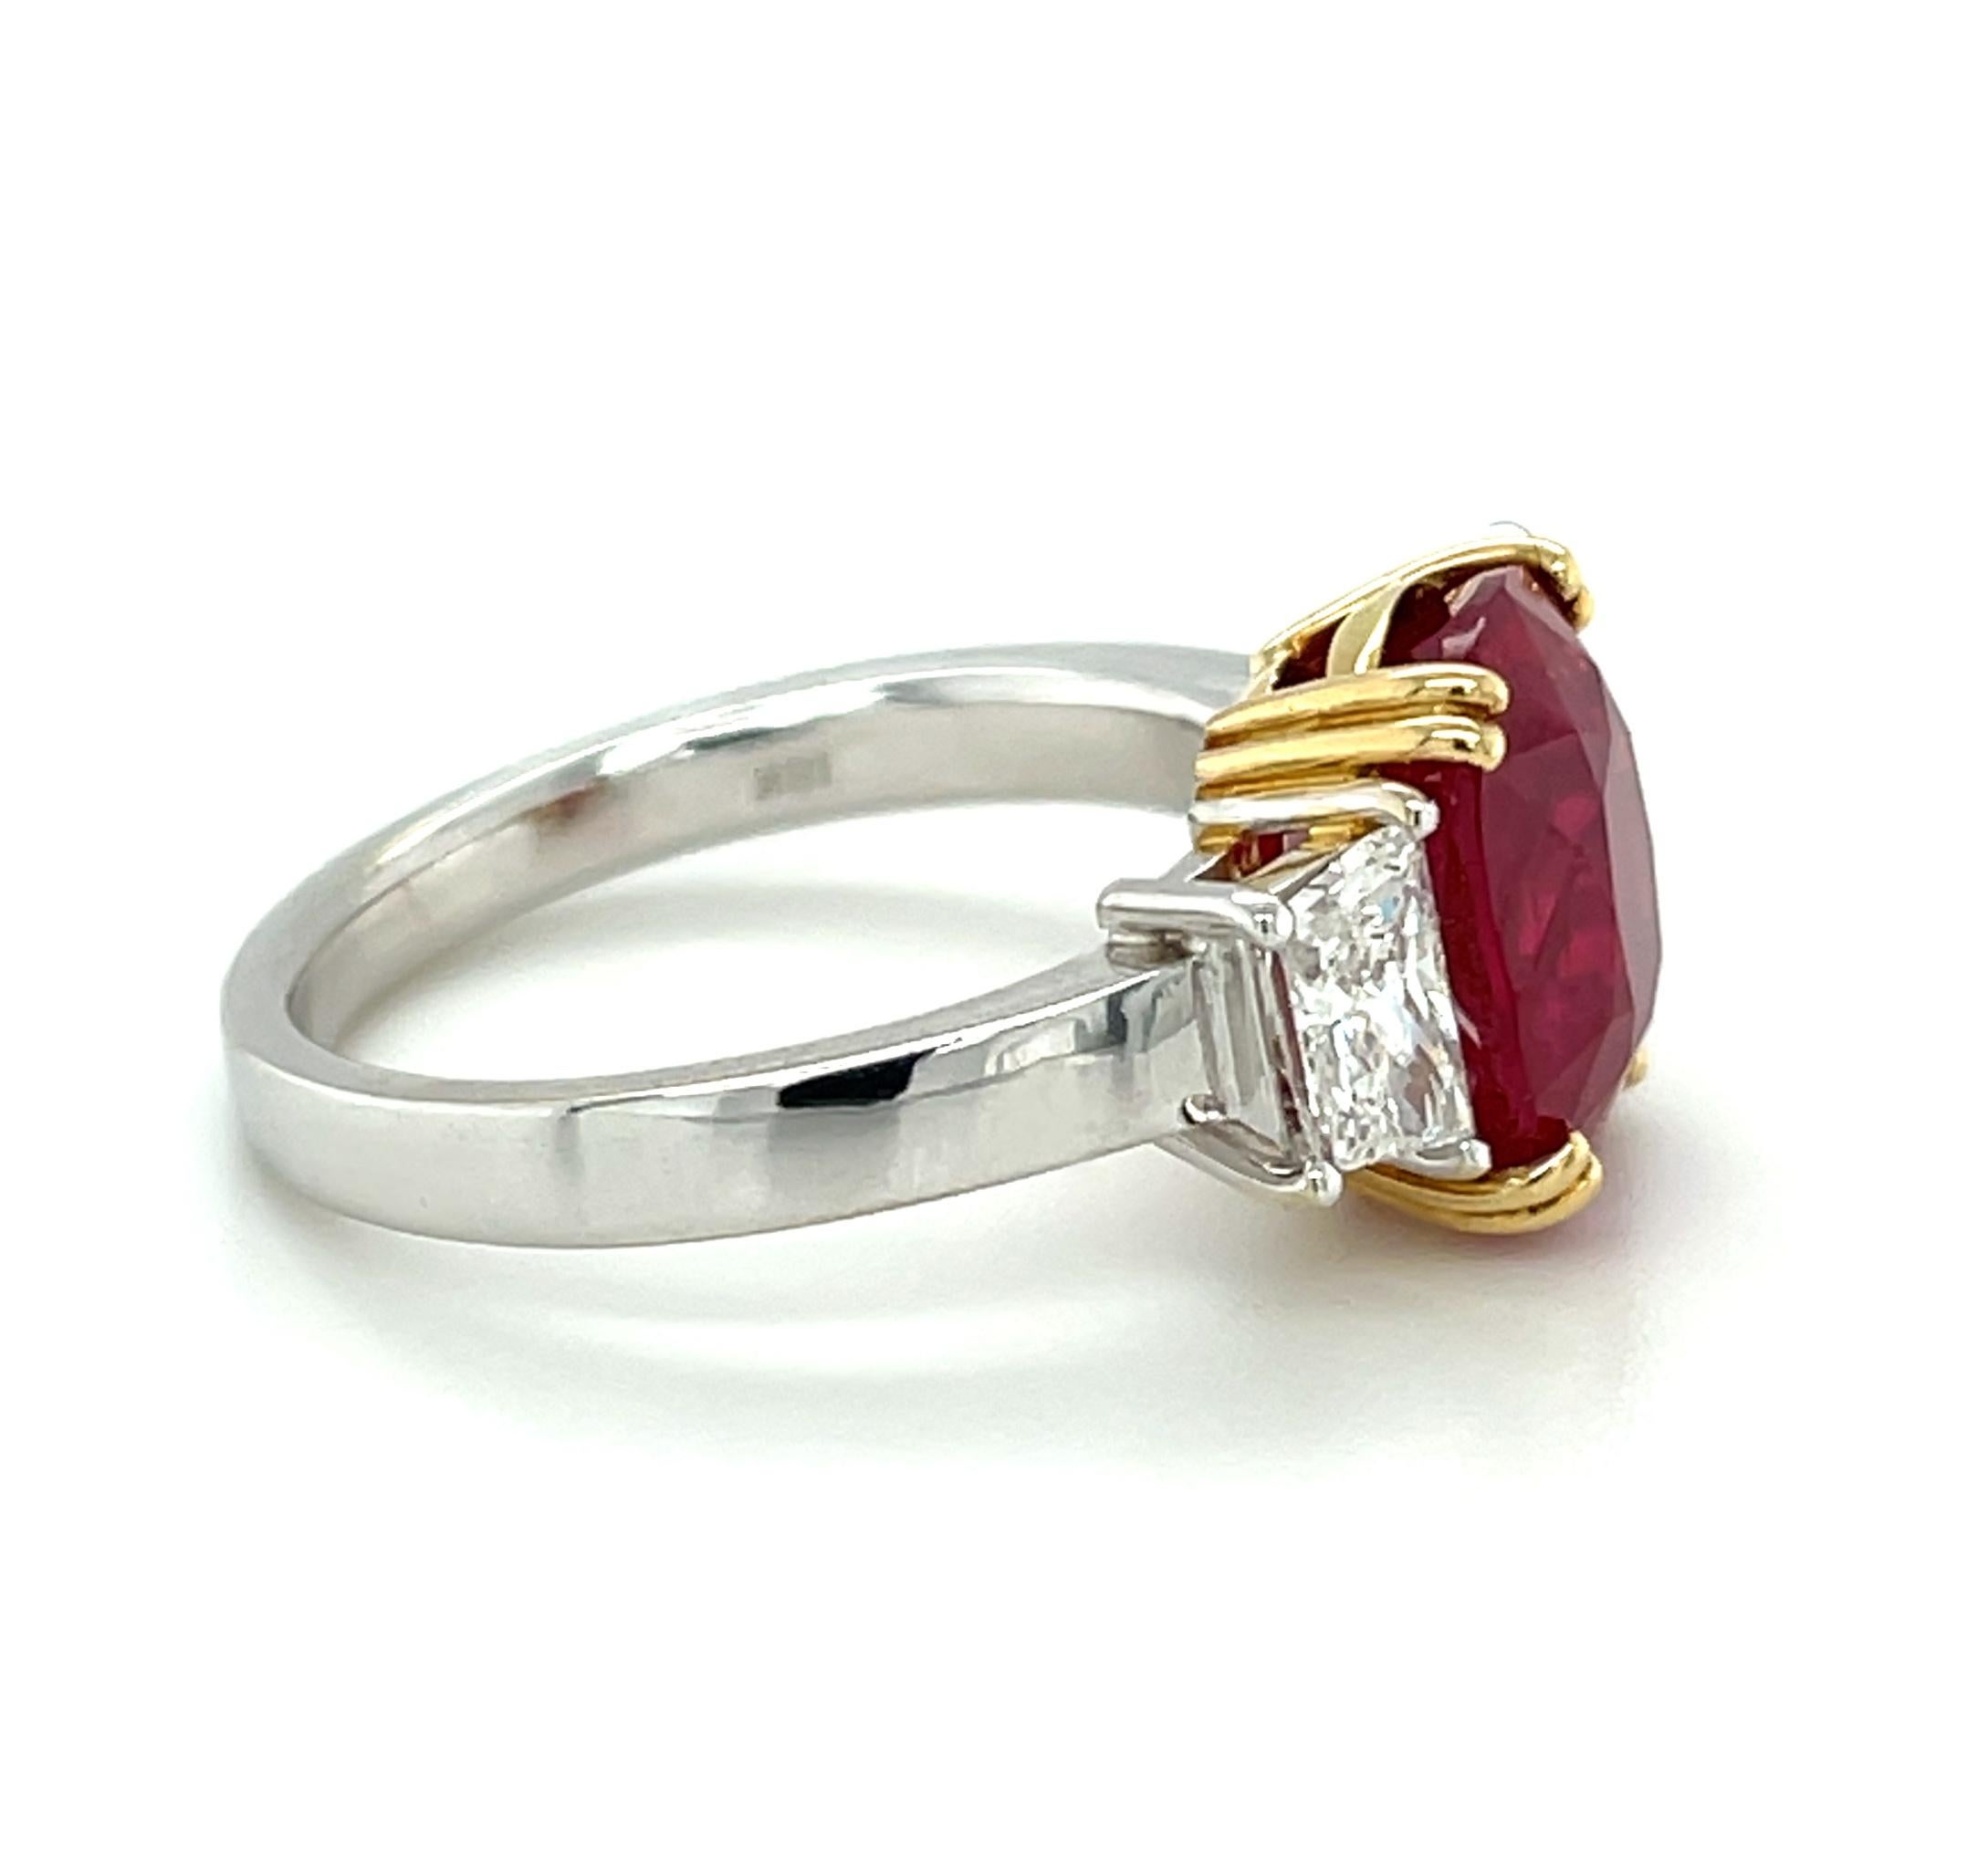 3 stone ruby engagement rings